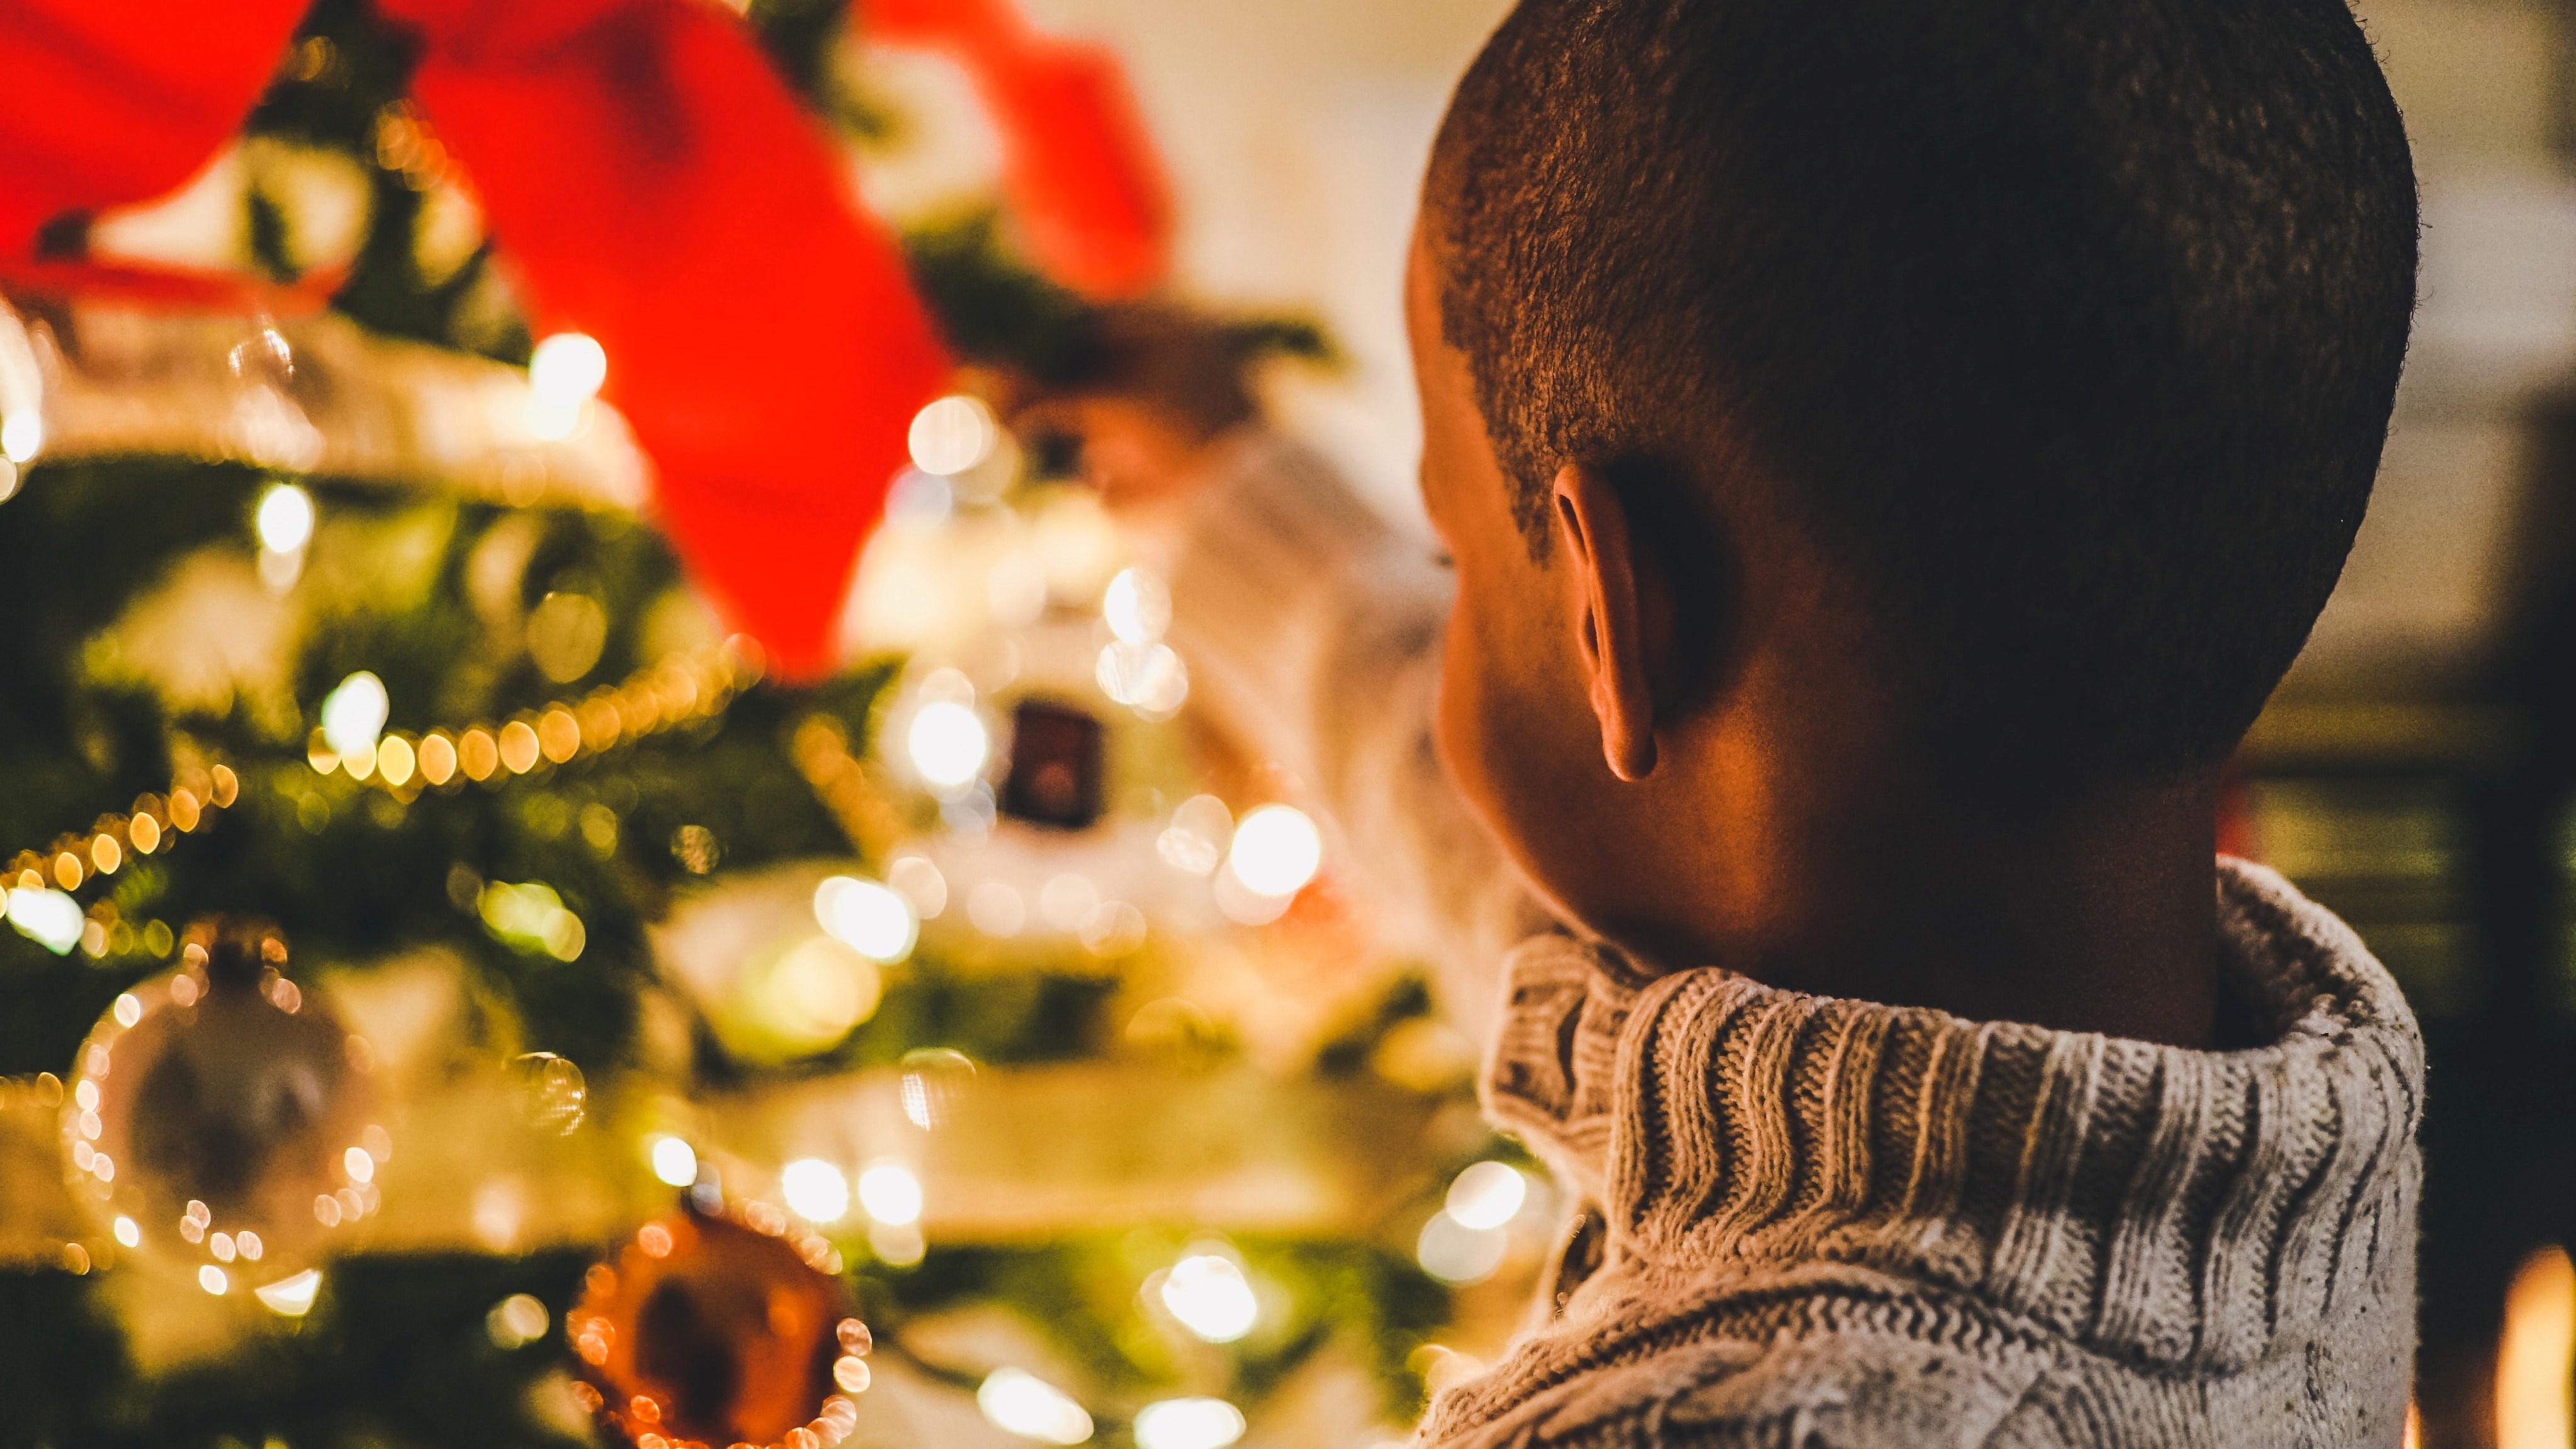 A young boy hanging a decoration on a Christmas tree.